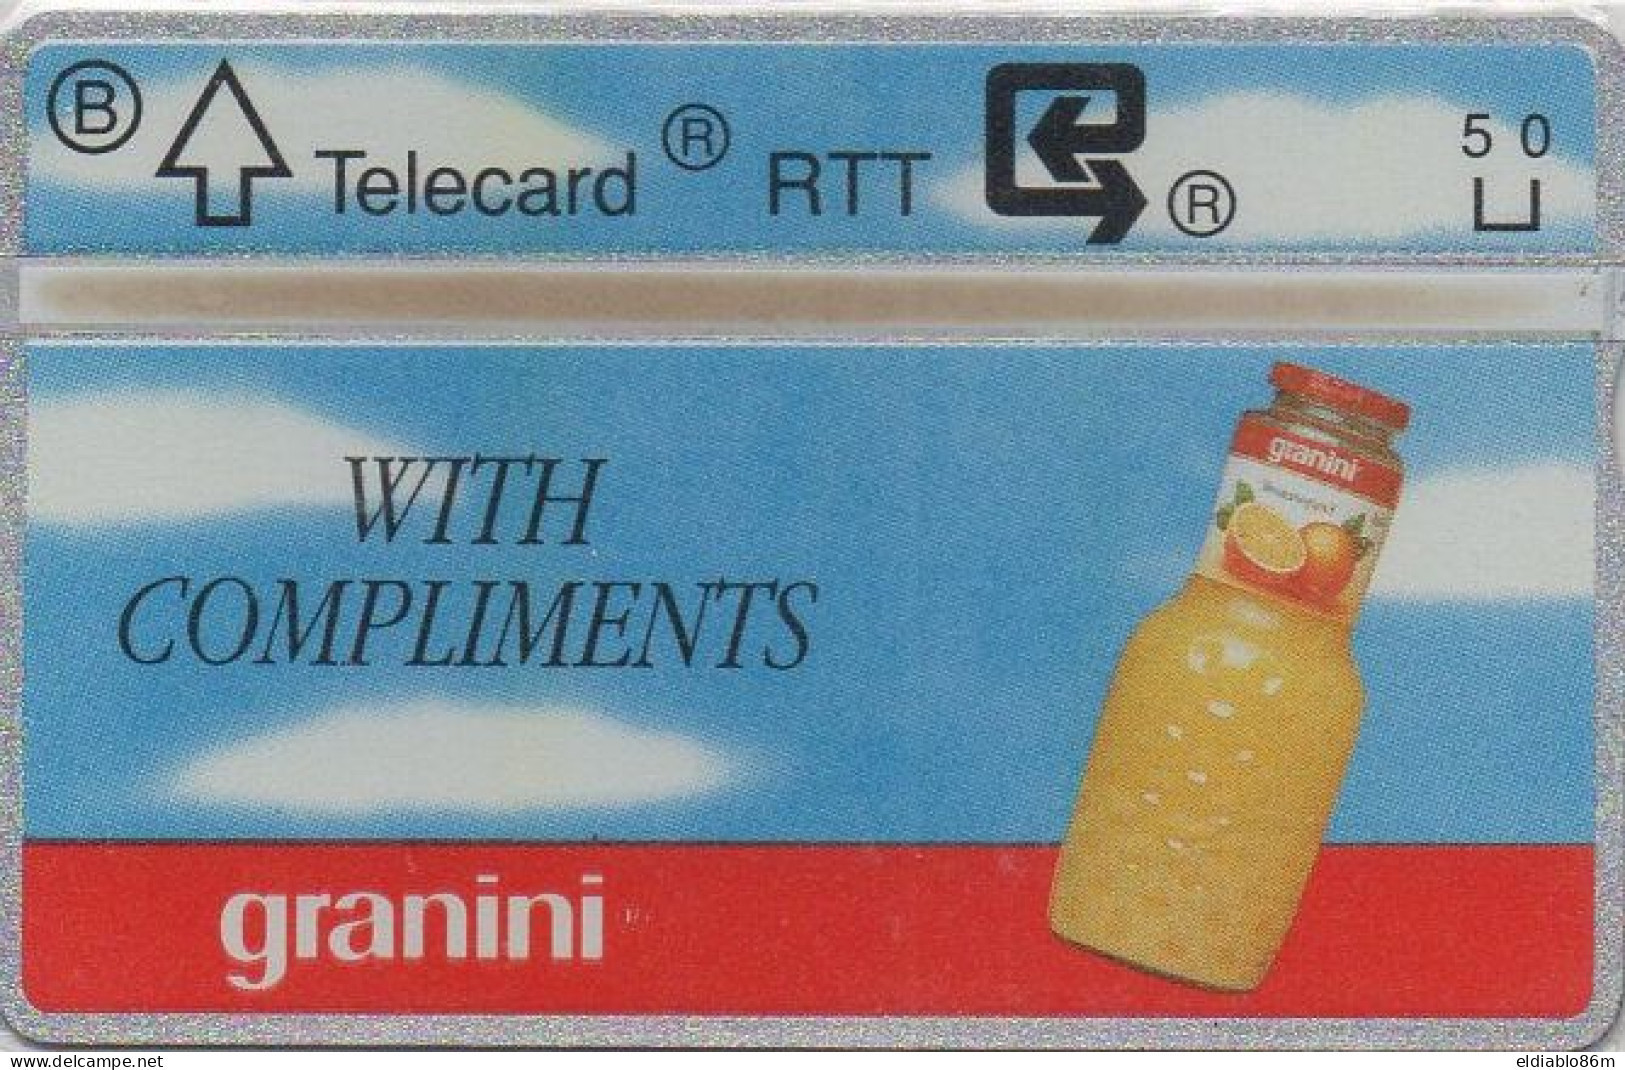 BELGIUM - L&G - P261 - GRANINI - WITH COMPLIMENTS - MINT - Without Chip